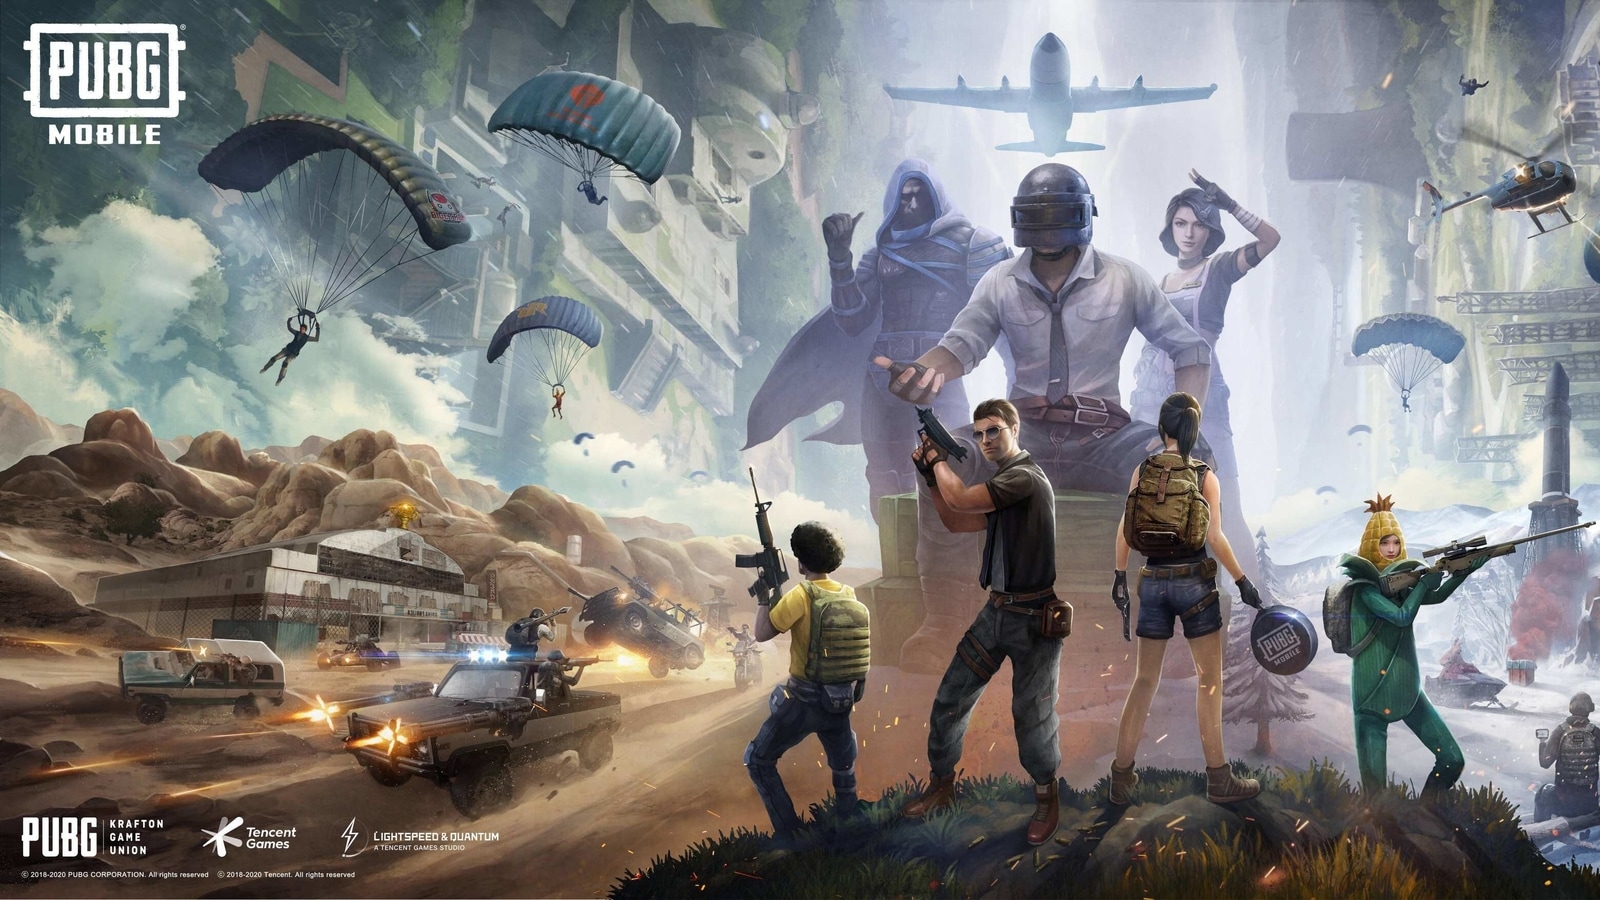 PUBG Mobile has now been downloaded more than 1 billion times ...